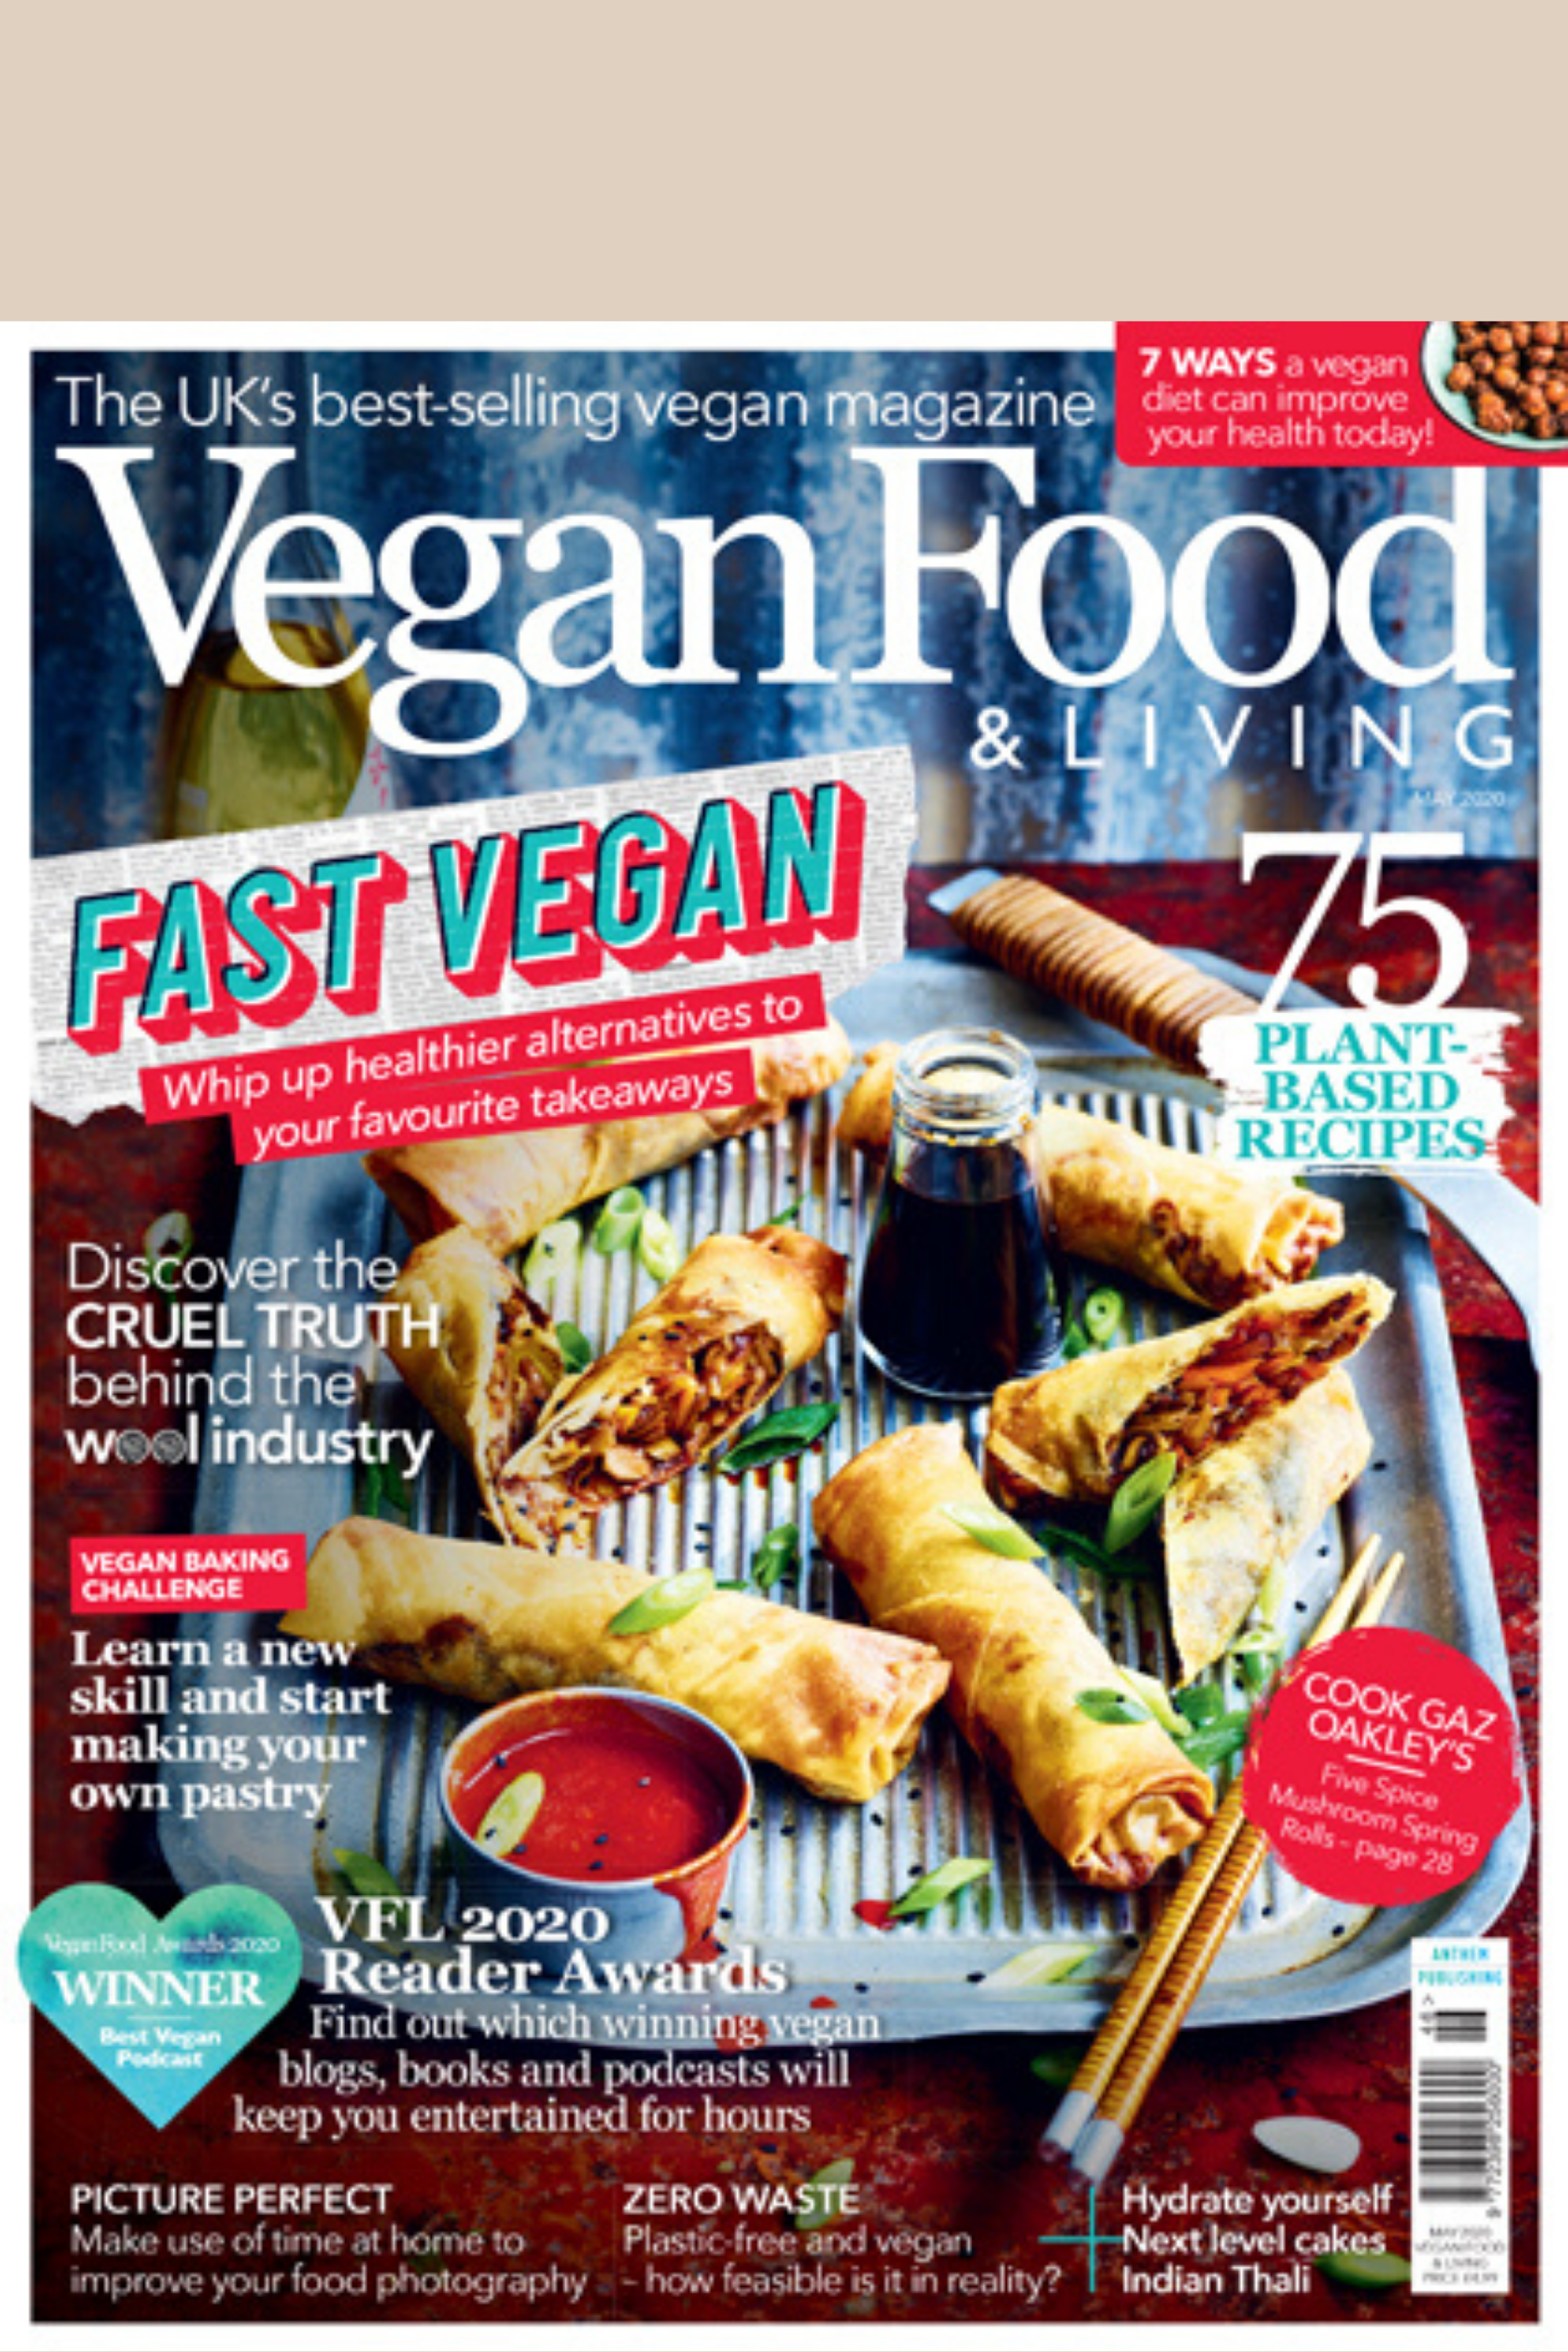 Vegan Food & Living May 2020 Issue - Pics and Ink